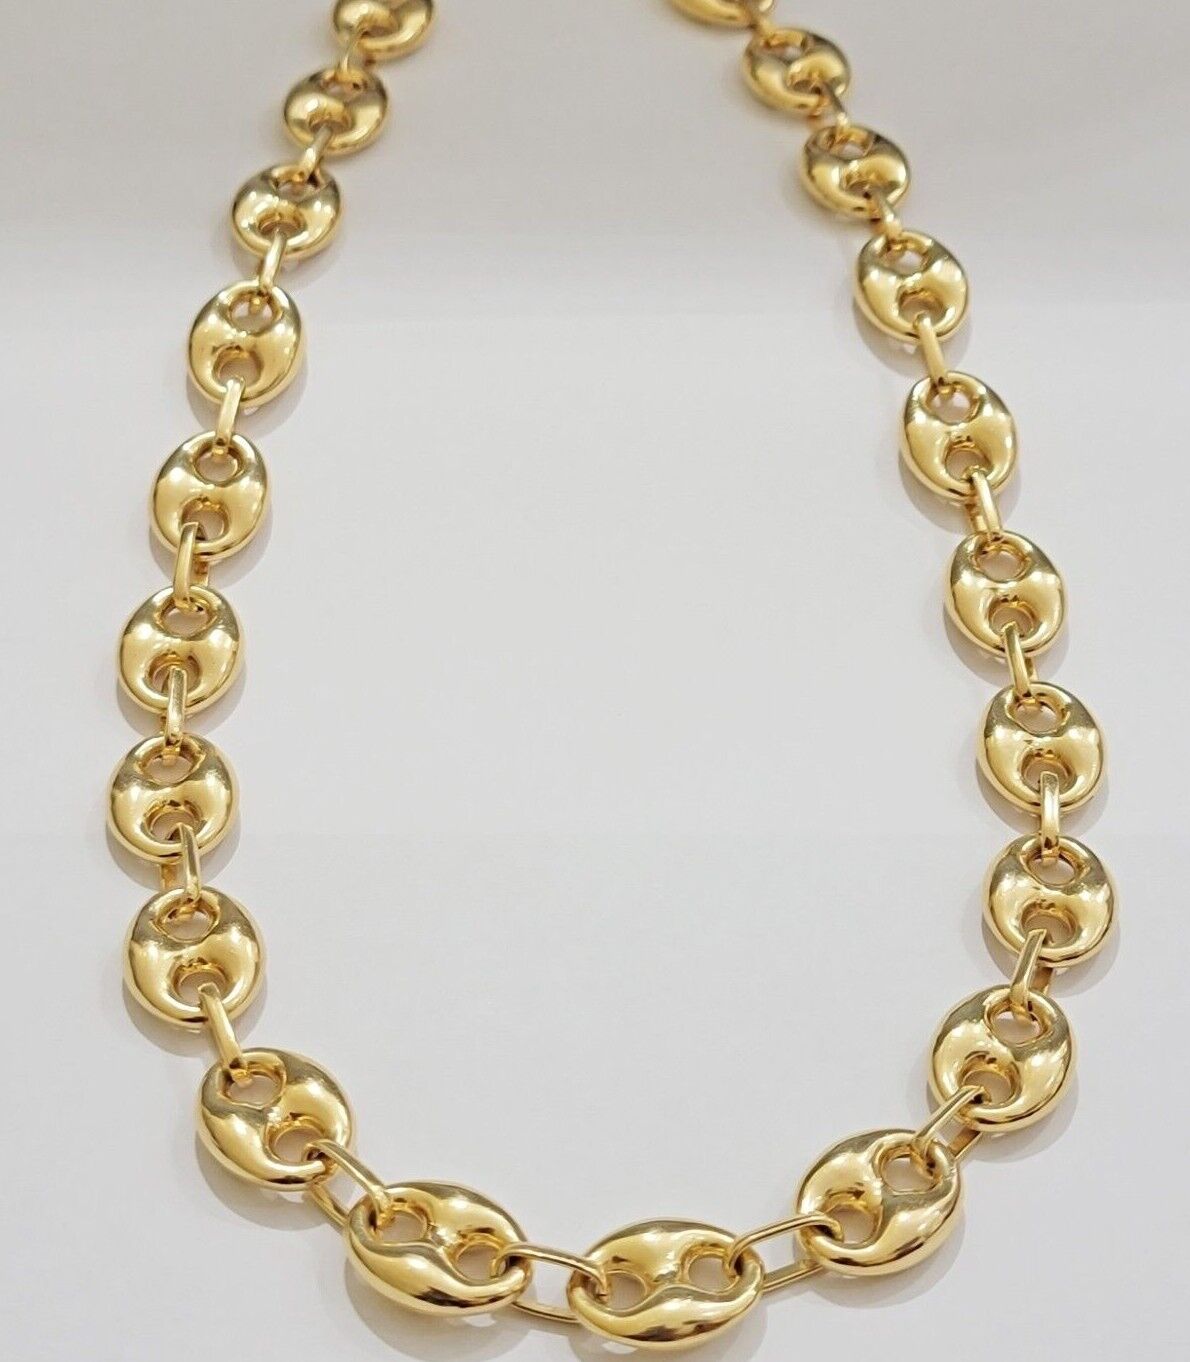 Real 10k Gold Puffed Mariner Anchor Link Chain Necklace 22